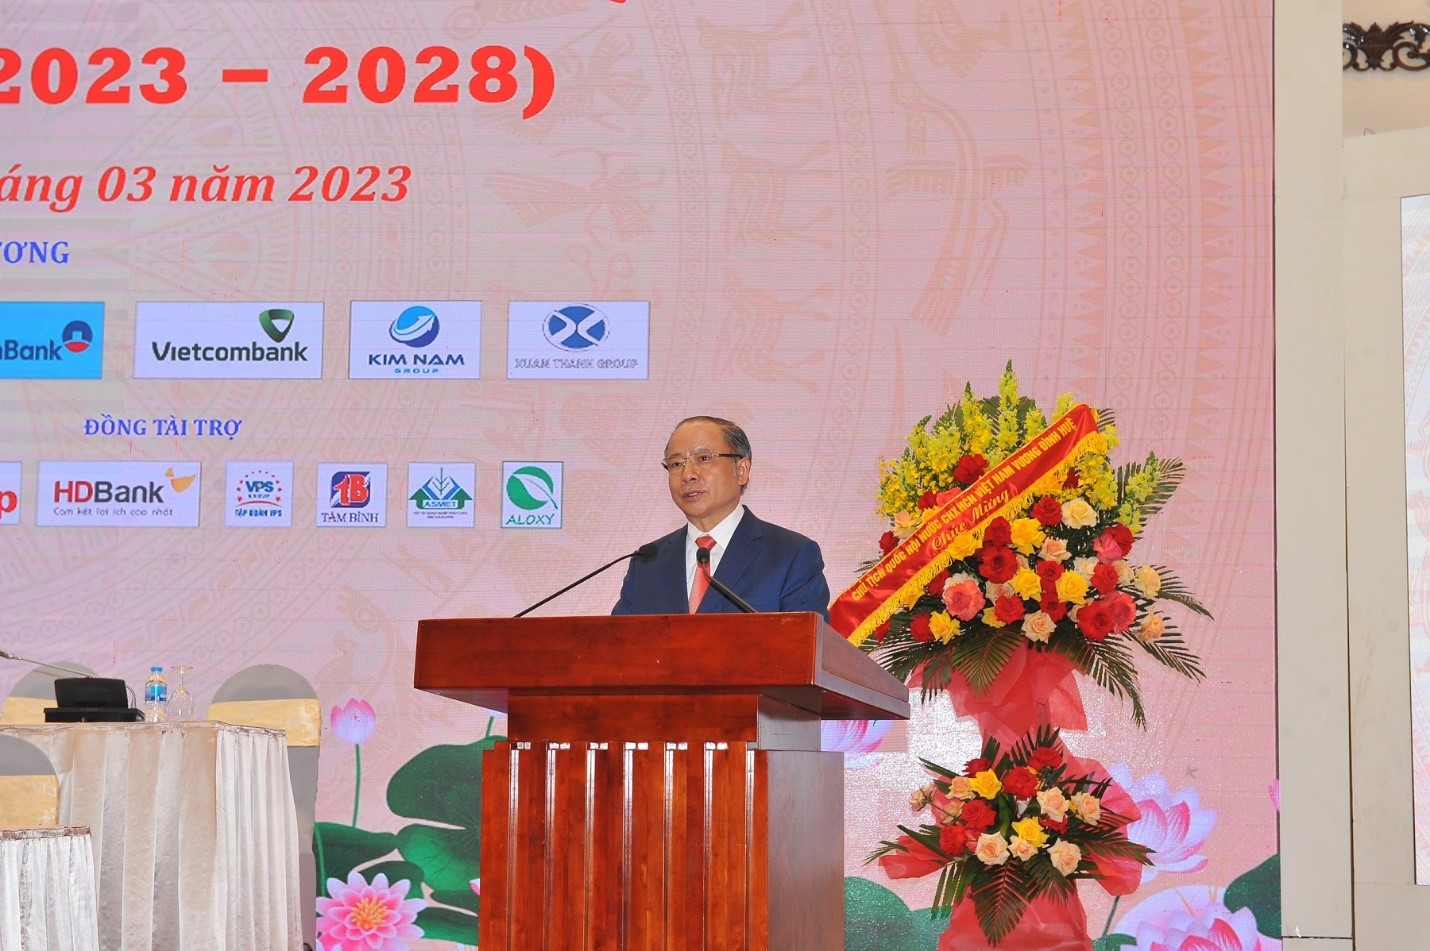 VINASME President - Nguyen Van Than shared: The congress took place in the context that the situation in the country and the world is undergoing profound changes in many aspects. Challenges and tasks in the coming term are very heavy.